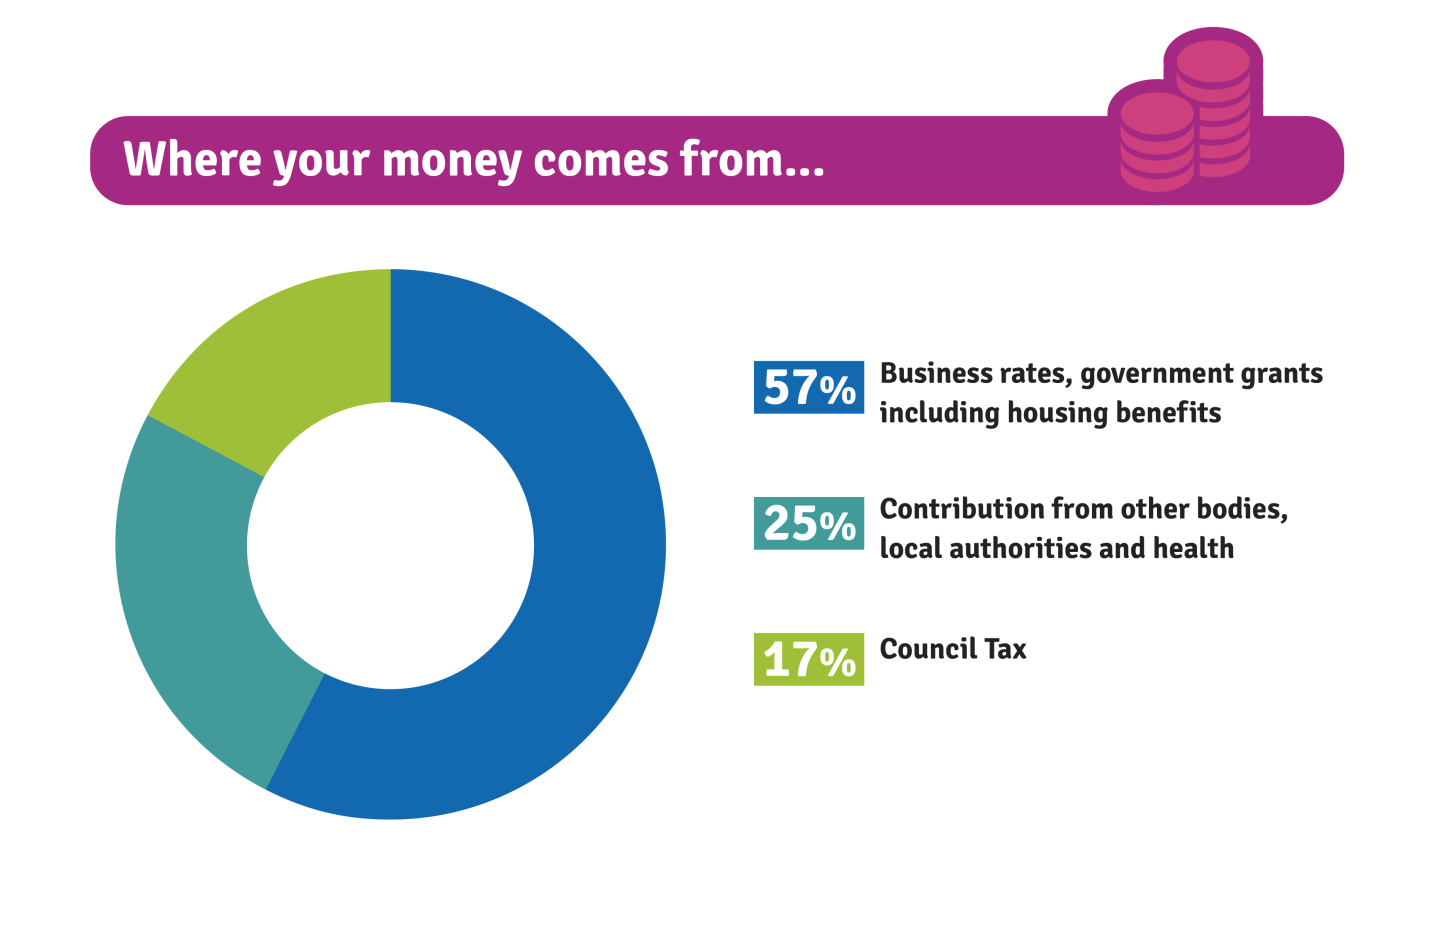 Pie chart showing the breakdown of where the Council tax money comes from